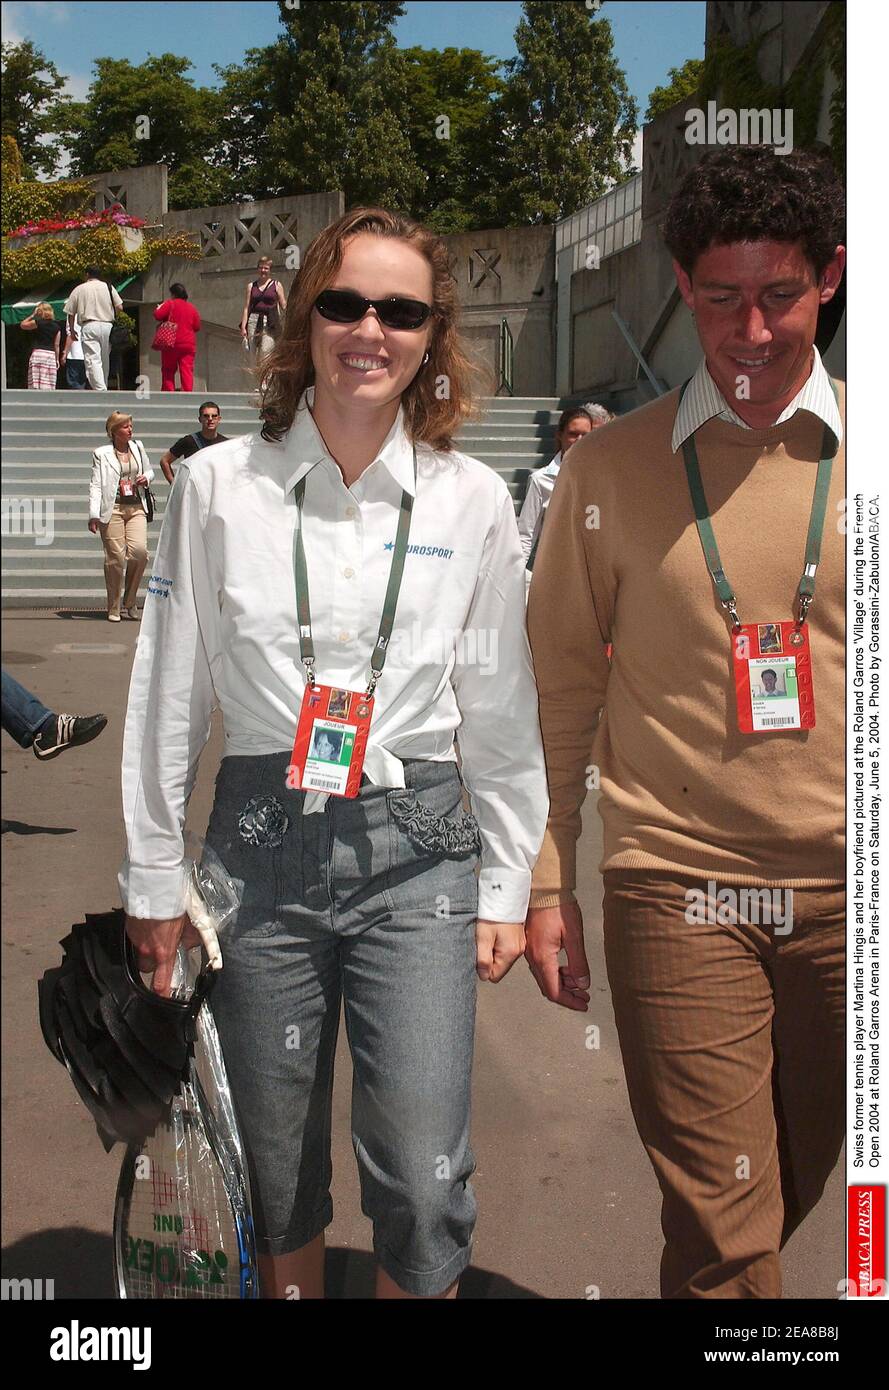 Swiss former tennis player Martina Hingis and her boyfriend pictured at the  Roland Garros 'Village' during the French Open 2004 at Roland Garros Arena  in Paris-France on Saturday, June 5, 2004. Photo